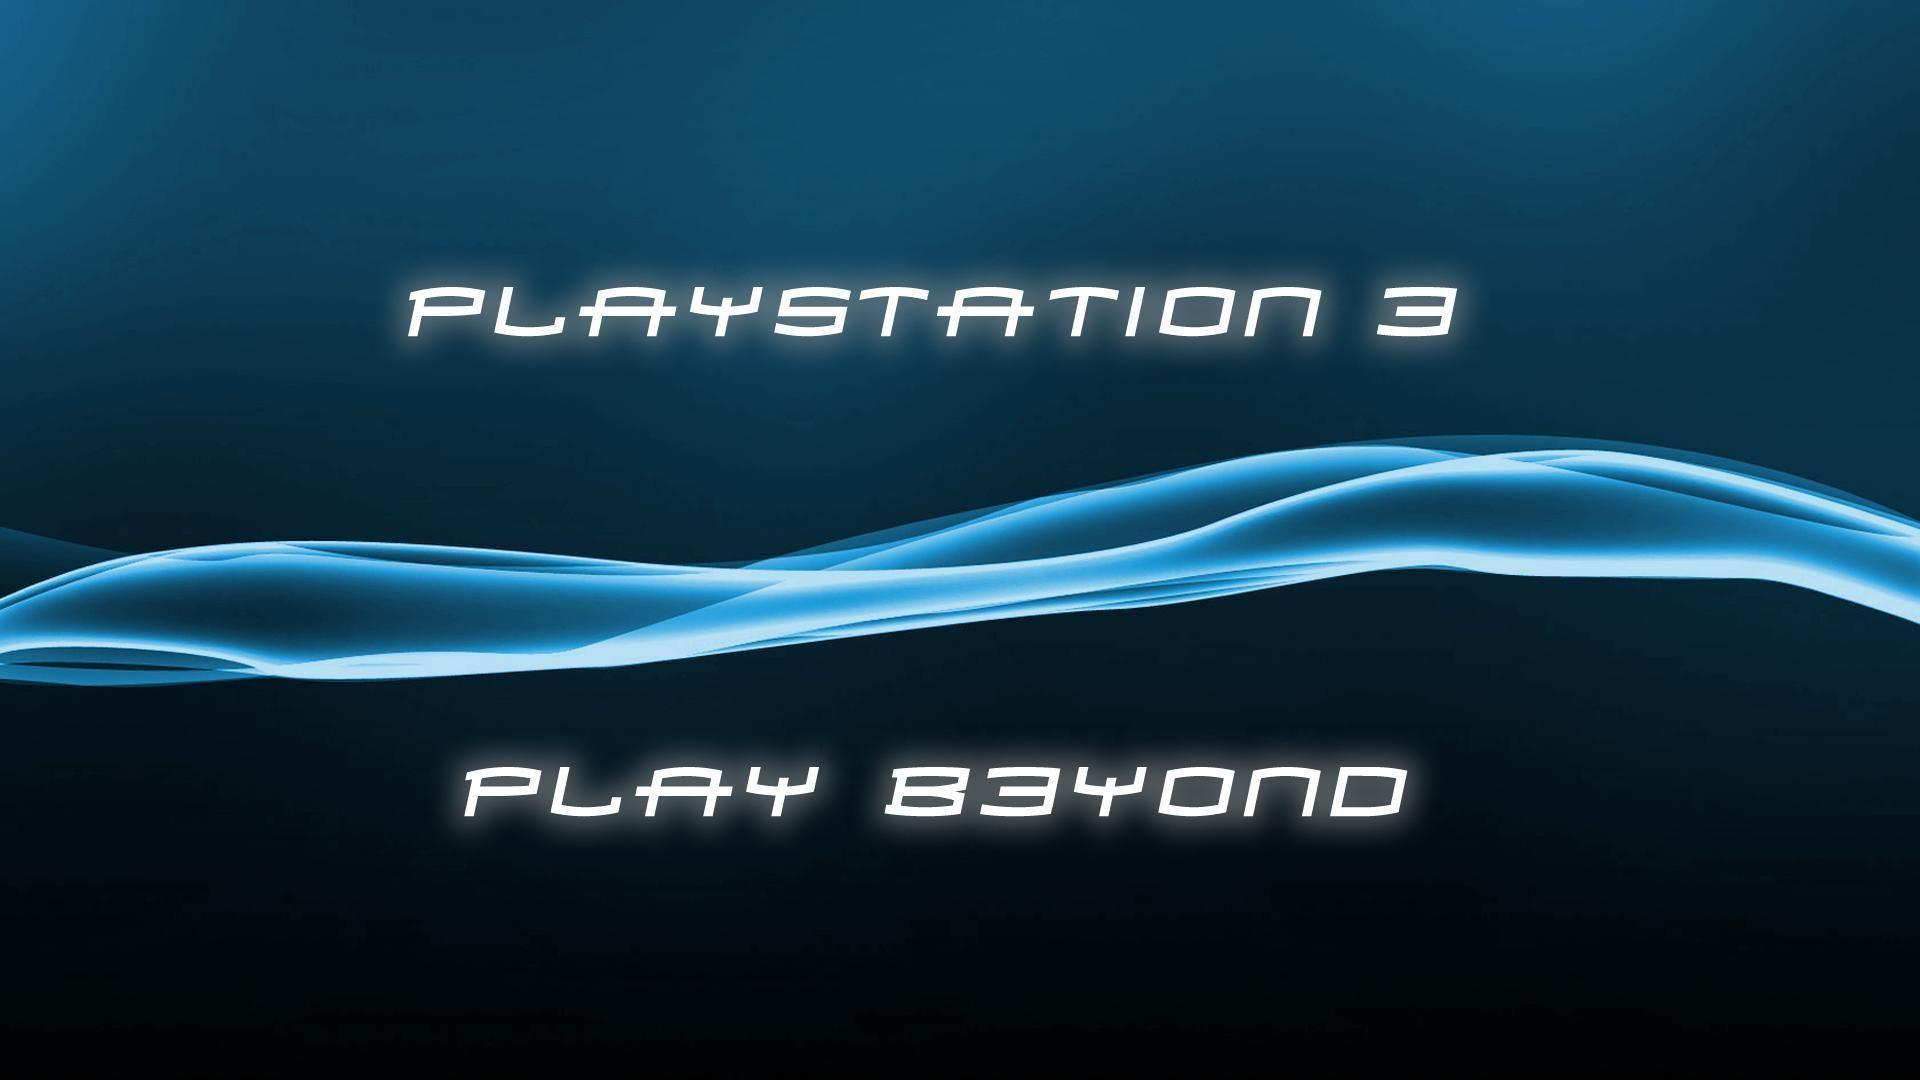 1920x1080 PlayStation 3 Wallpapers Top Free PlayStation 3 Backgrounds